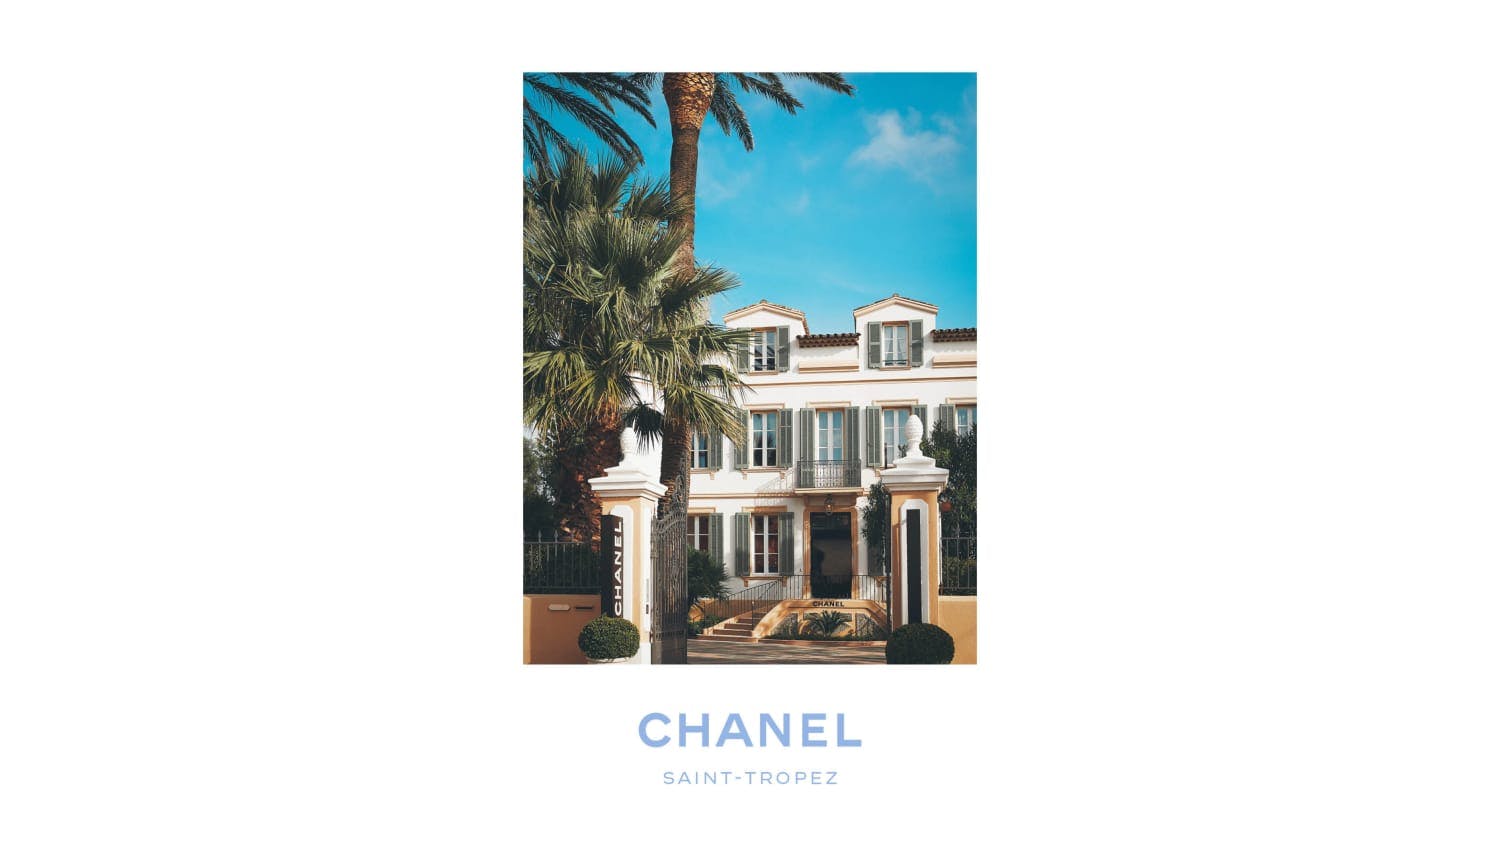 New Location for CHANEL in Saint-Tropez